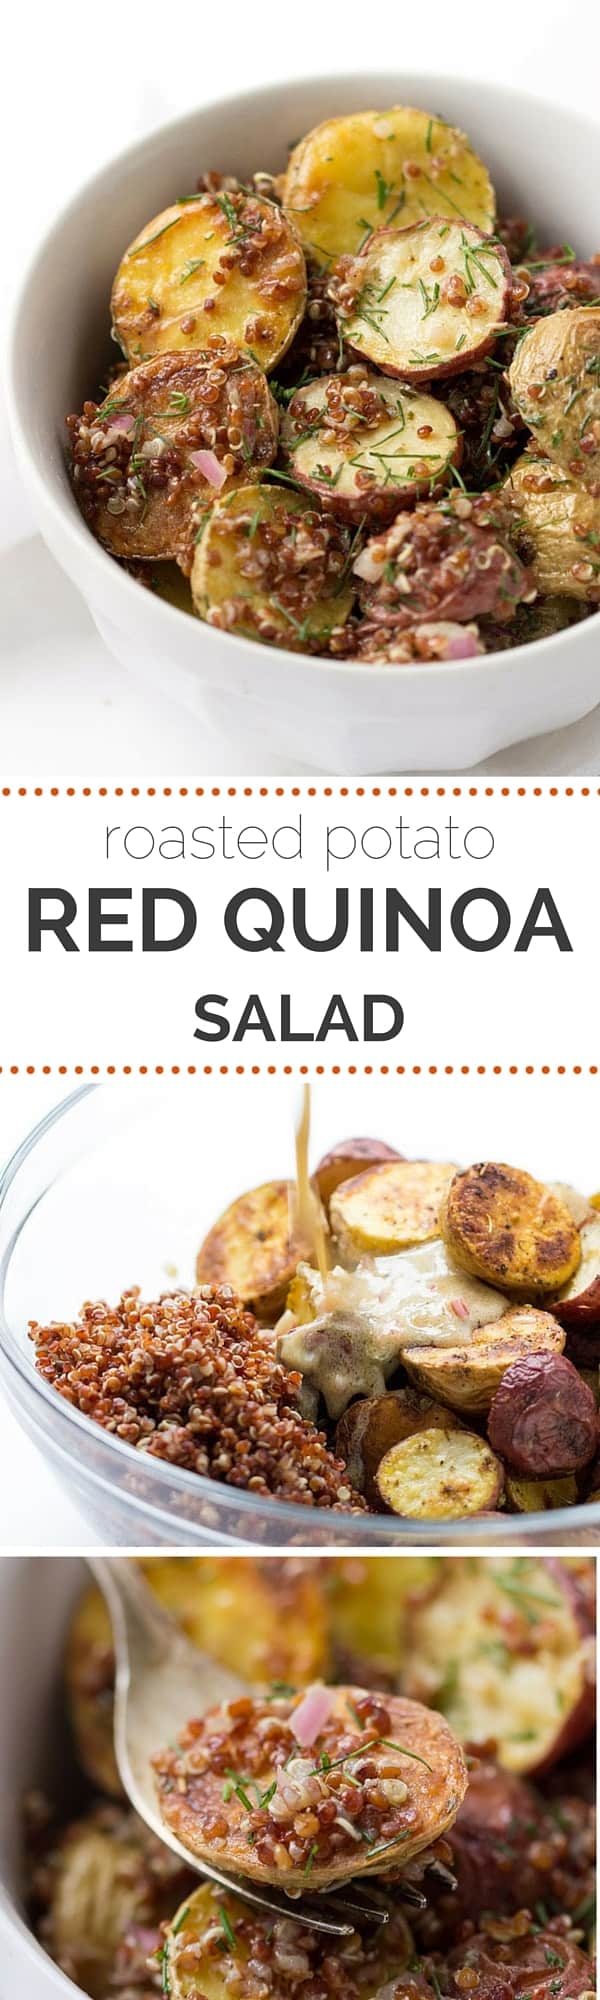 The perfect potato salad using roasted new potatoes, red quinoa and served with a shallot-caper dressing - so easy and SO delicious!